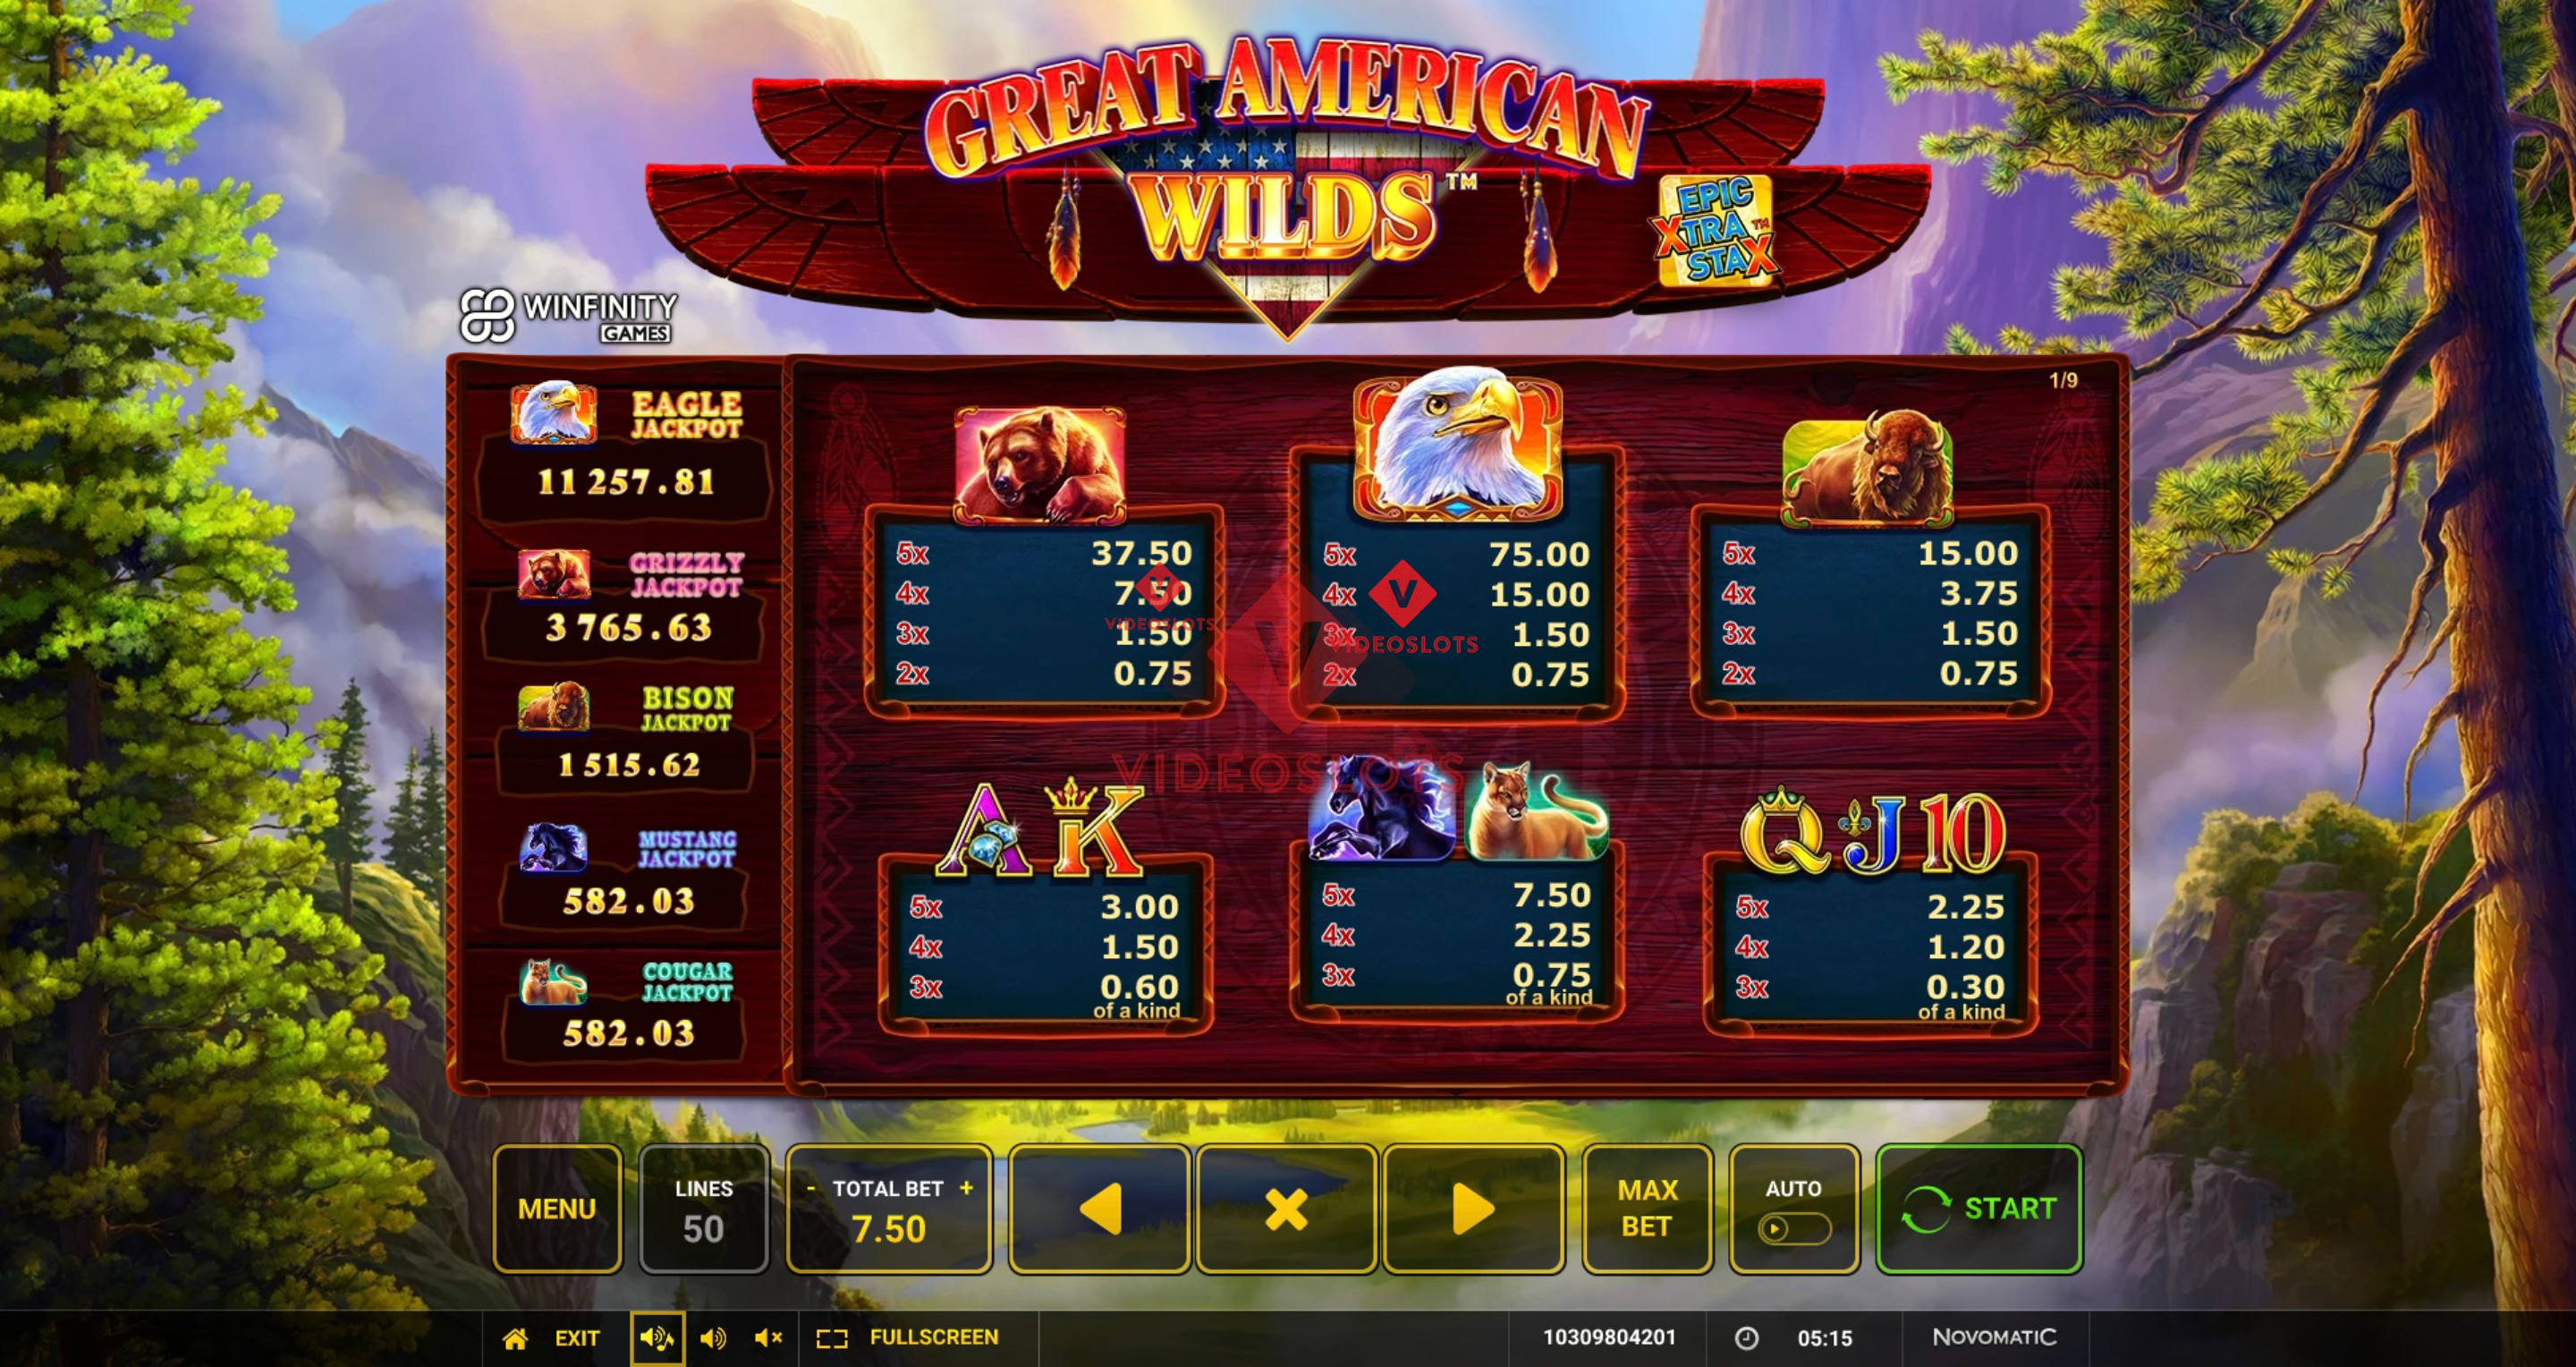 Pay Table for Great American Wilds slot from Greentube